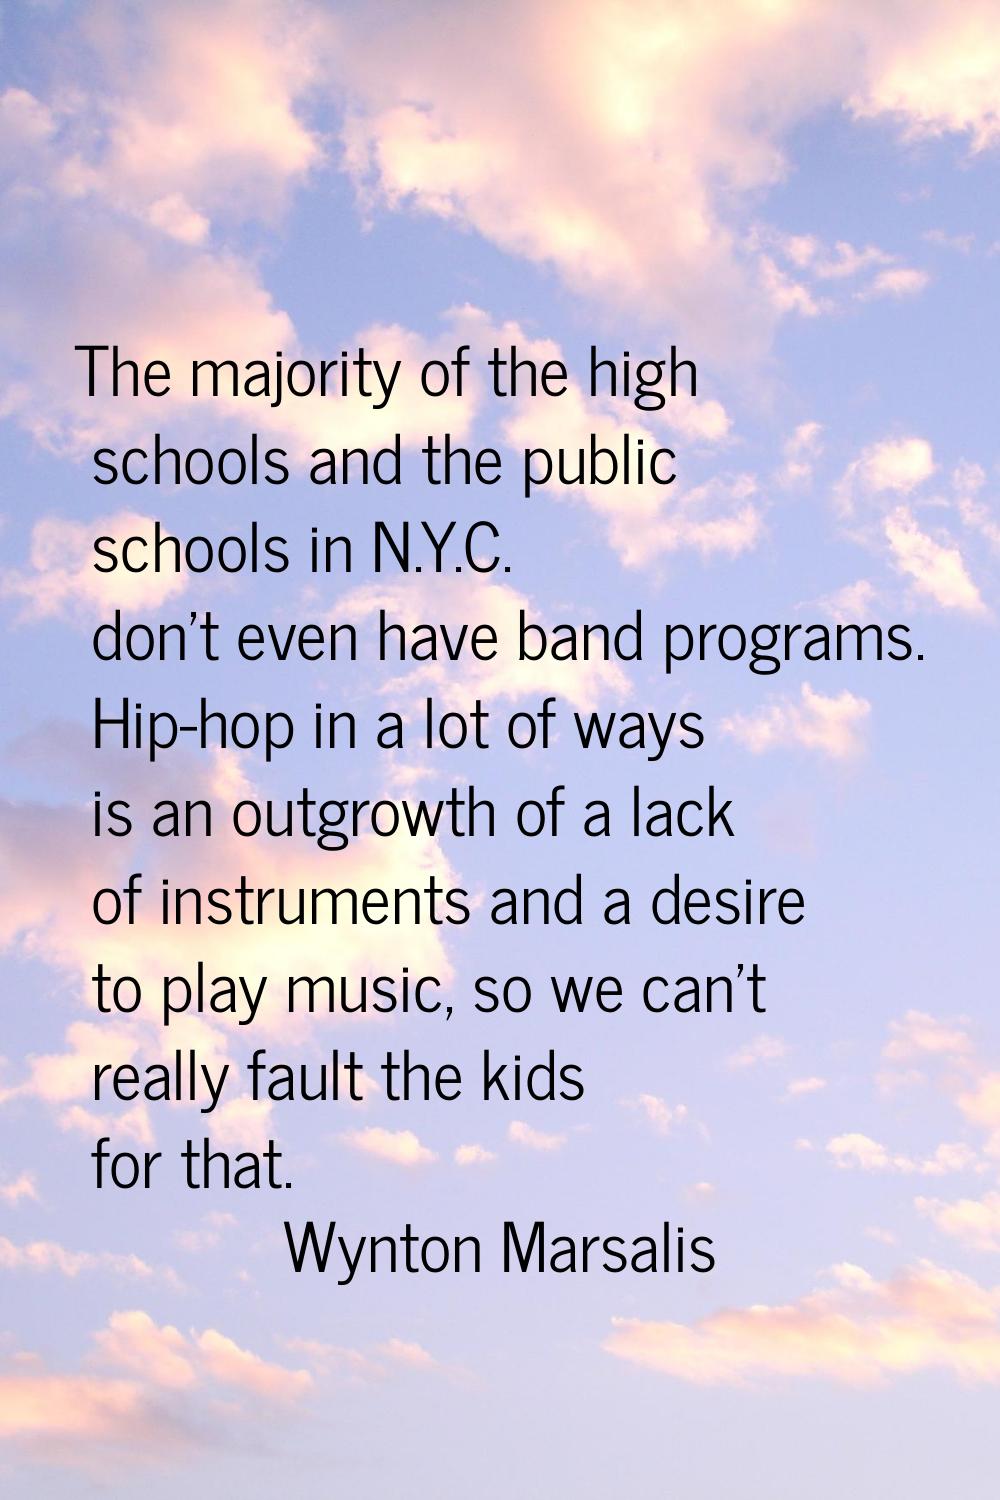 The majority of the high schools and the public schools in N.Y.C. don't even have band programs. Hi